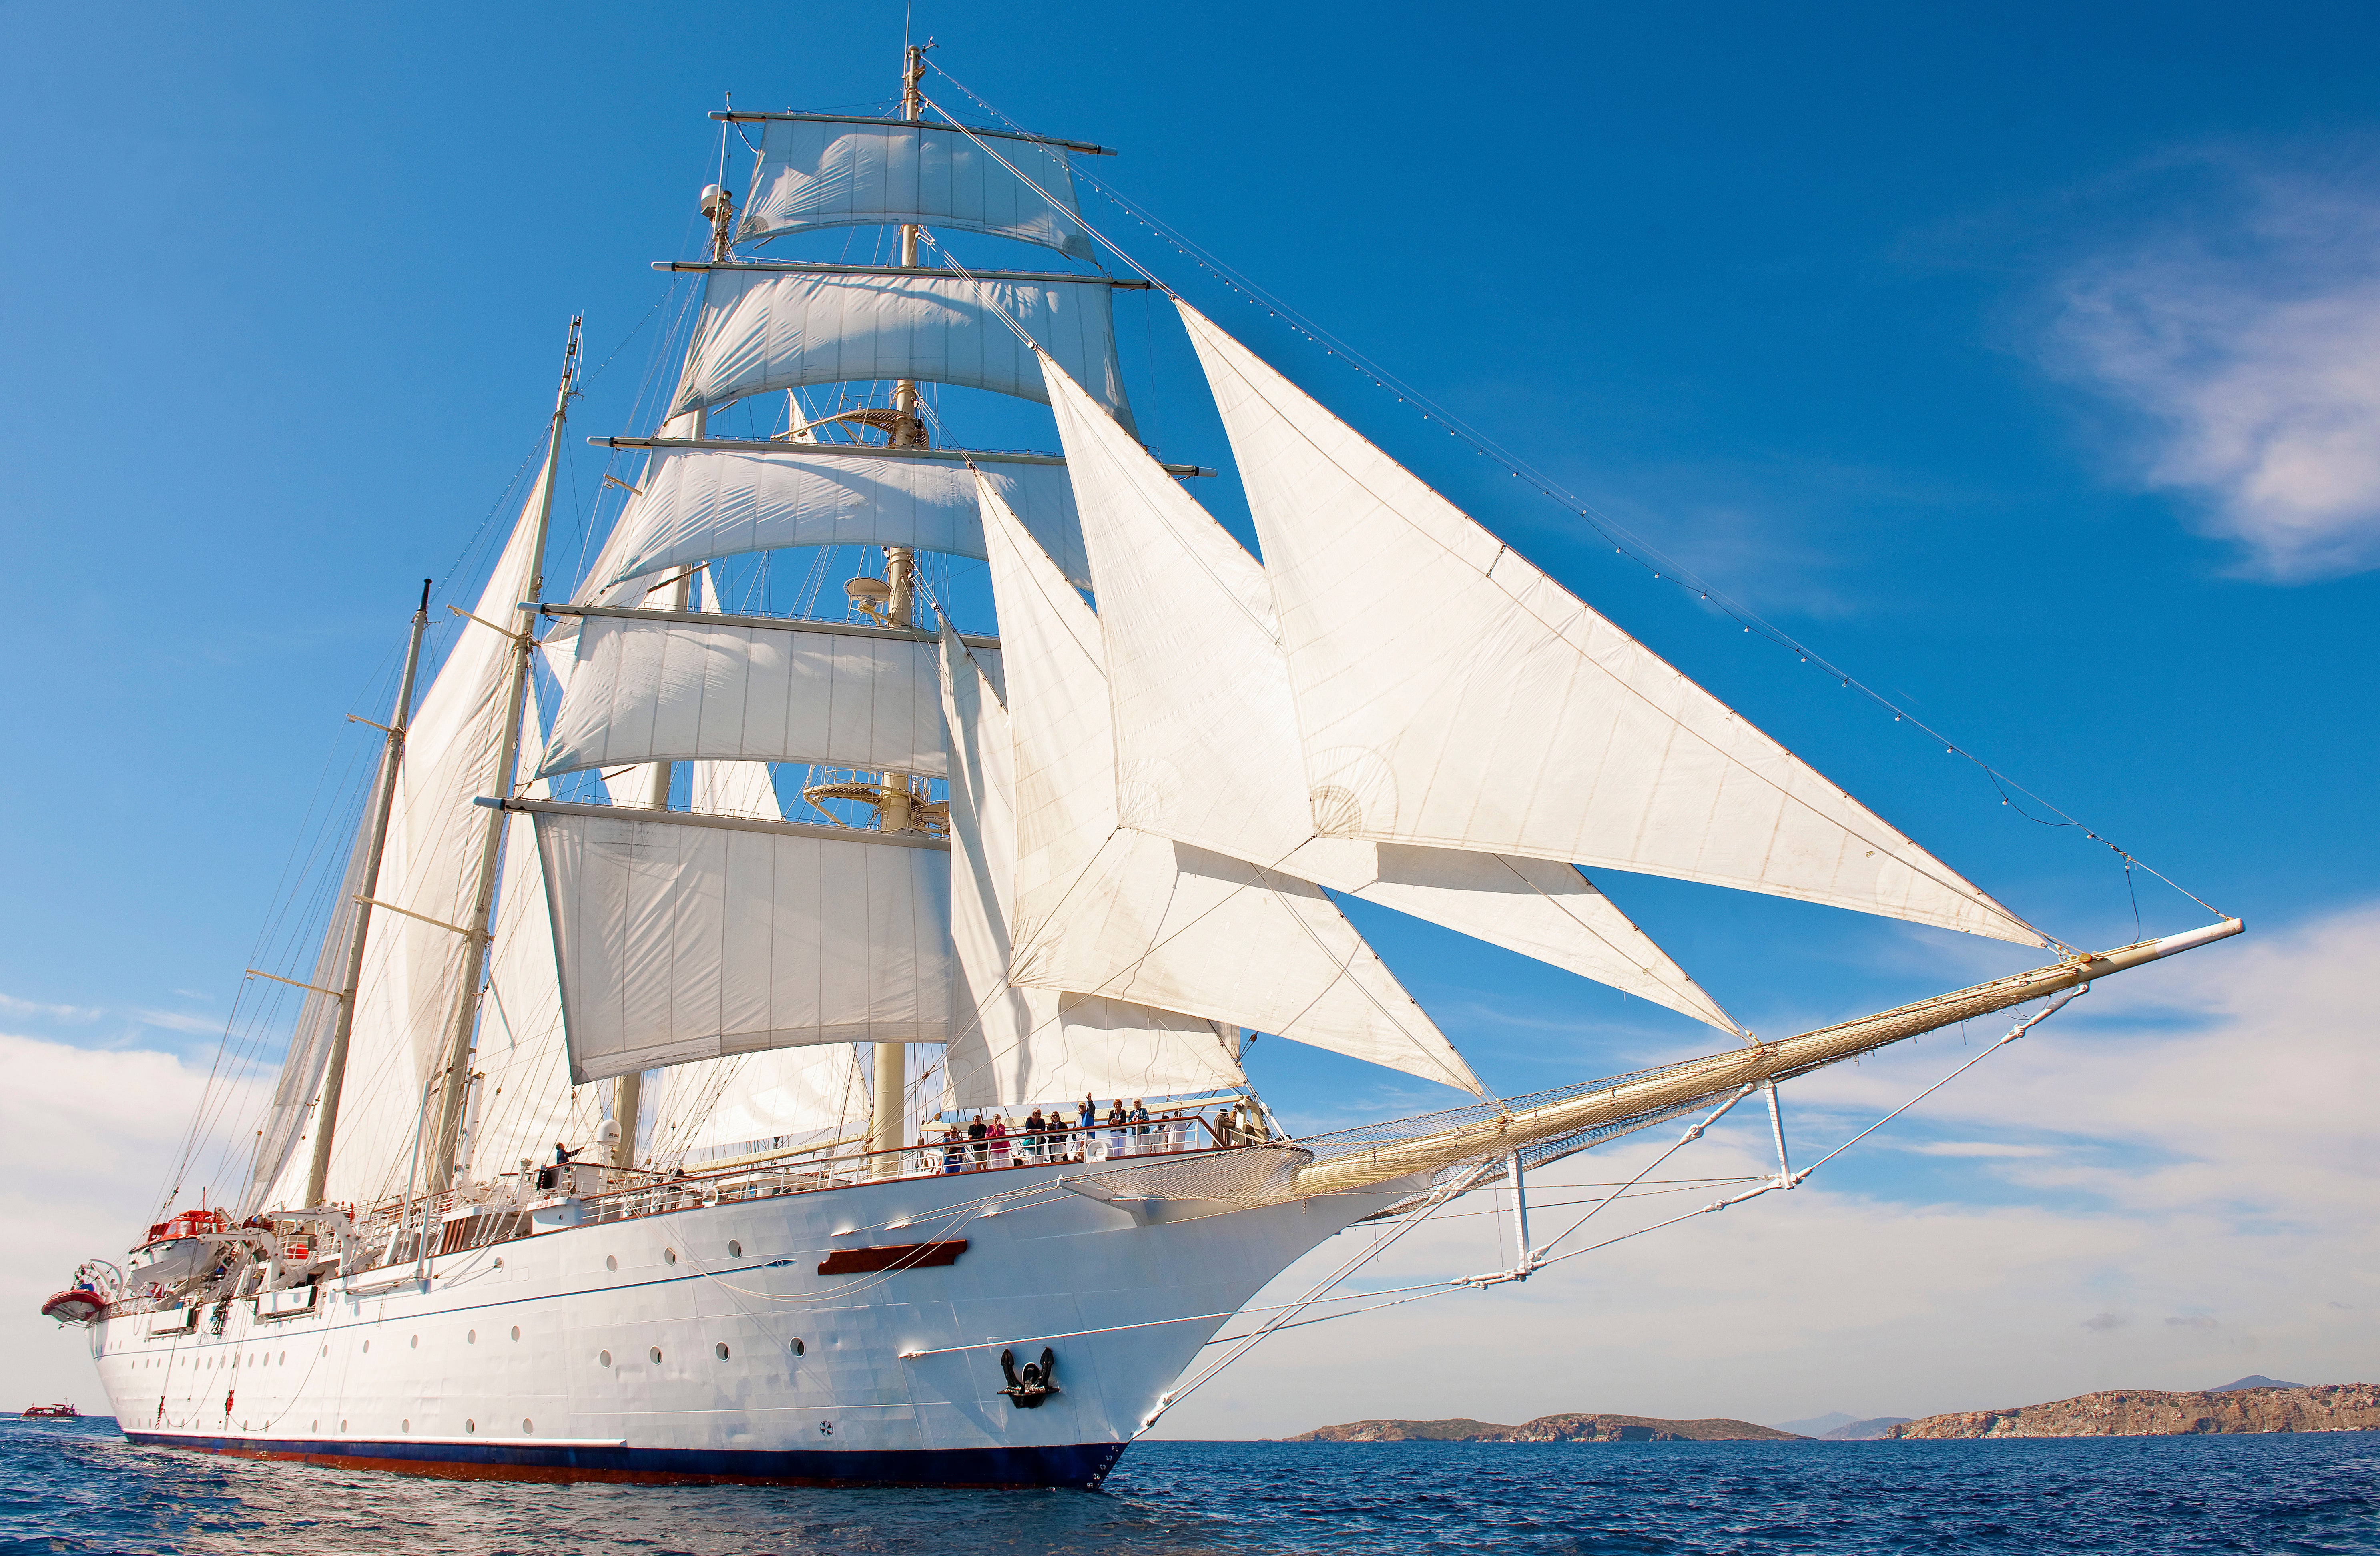 It’s bonjour to luxury with Star Clippers Med offerings